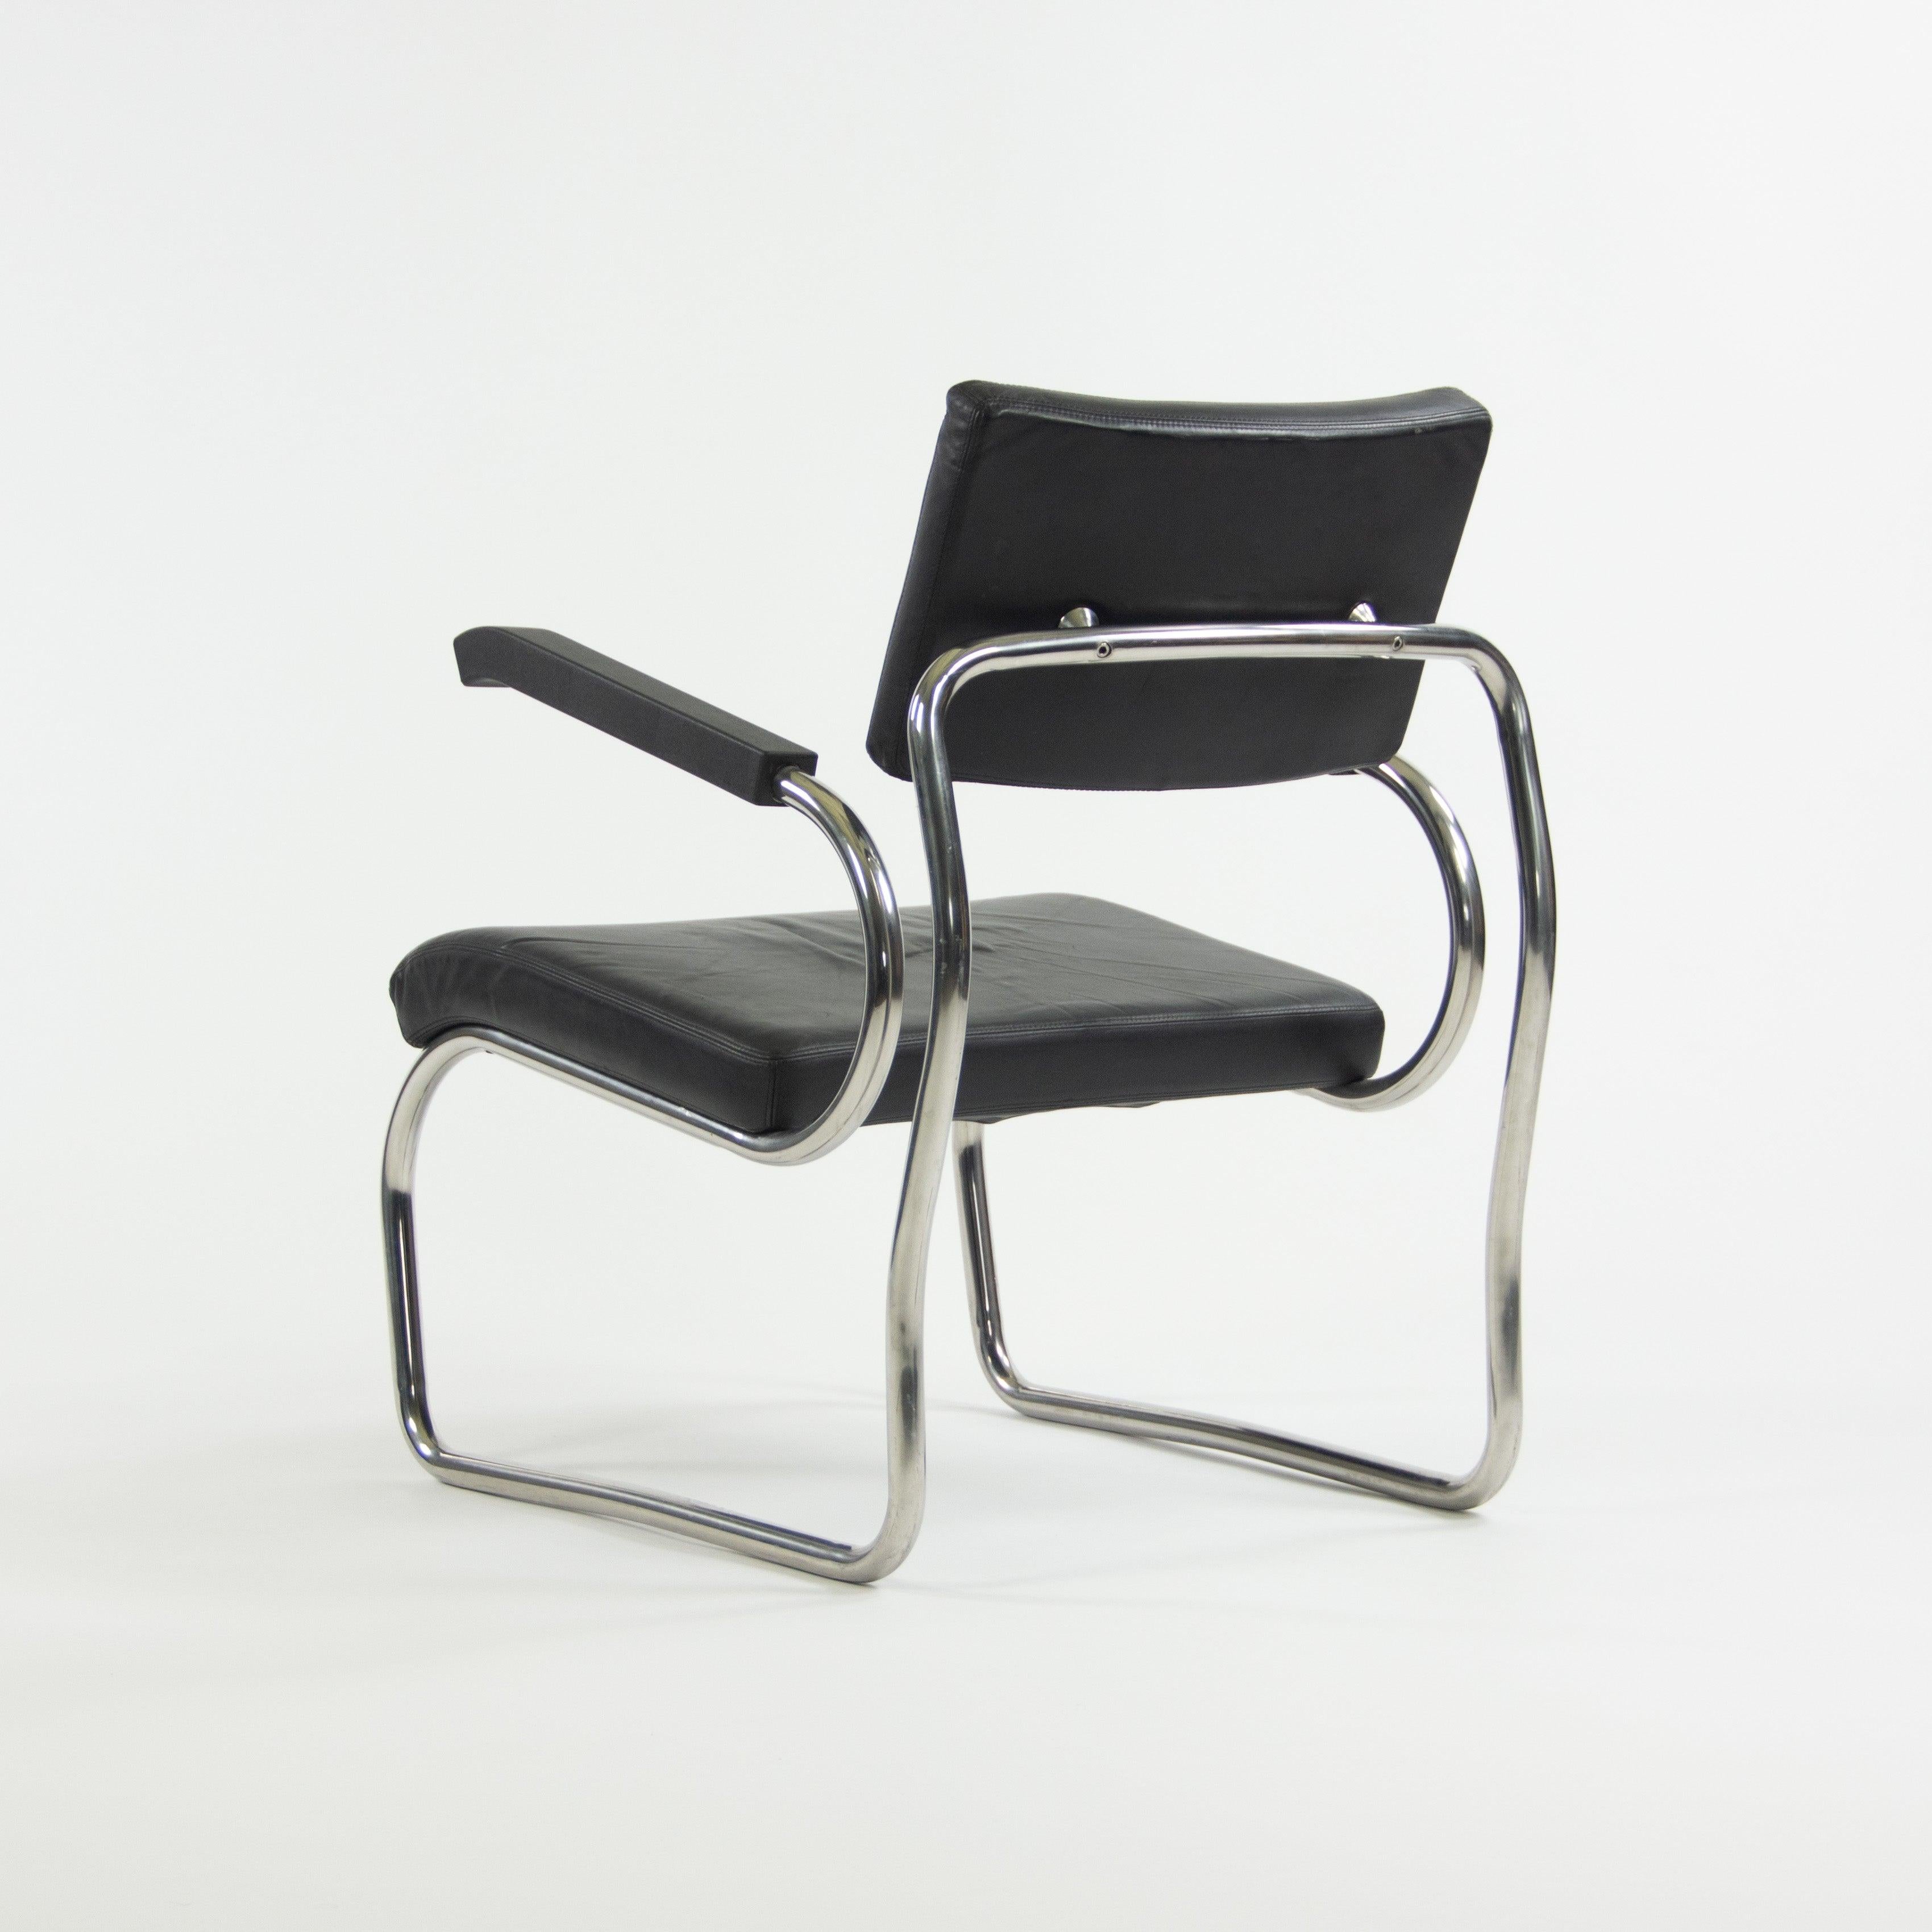 Italian 1990s Pair of Sant'elia Arm Chairs by Giuseppe Terragni for Zanotta Leather For Sale